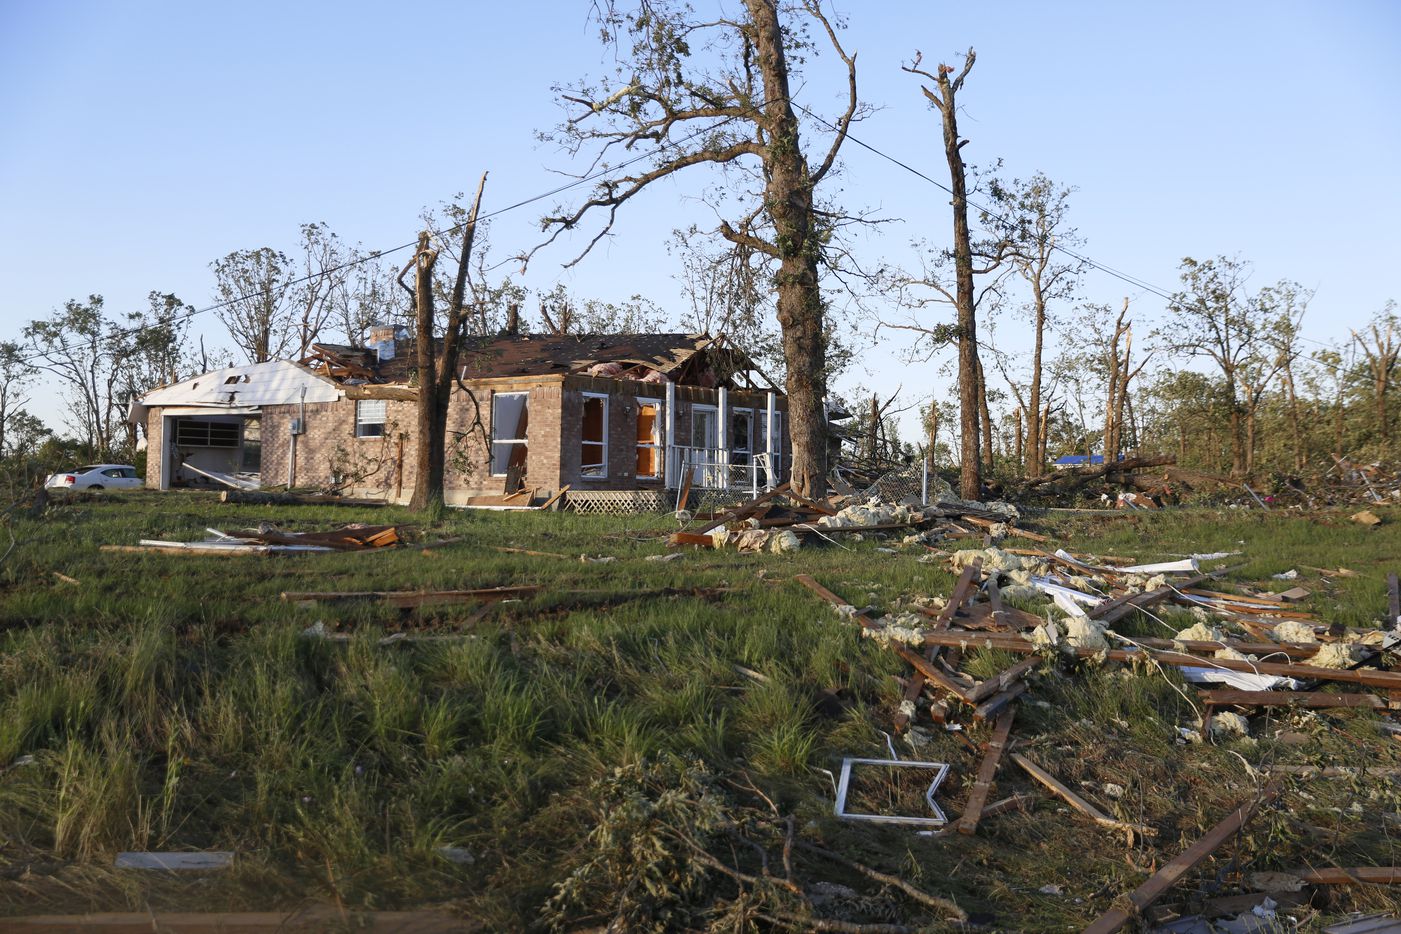 One of the houses off Highway 69 in Emory in the aftermath of a tornado, photographed on...